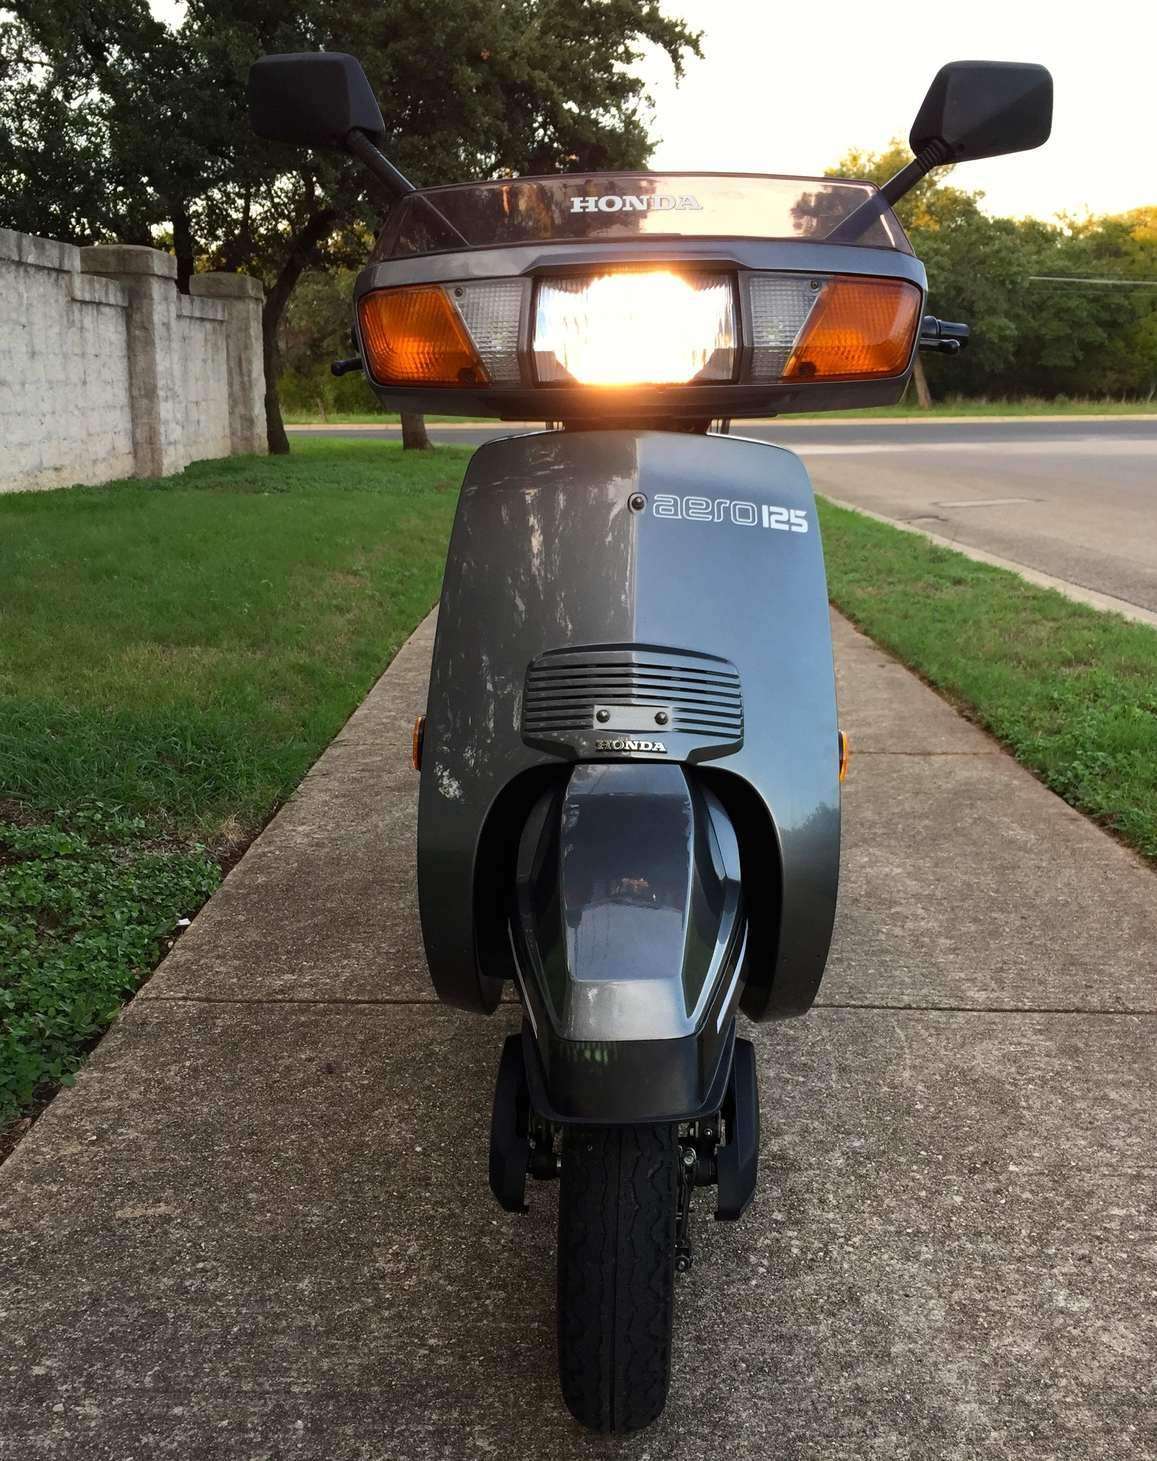 JDM front lights, mirrors from CH250